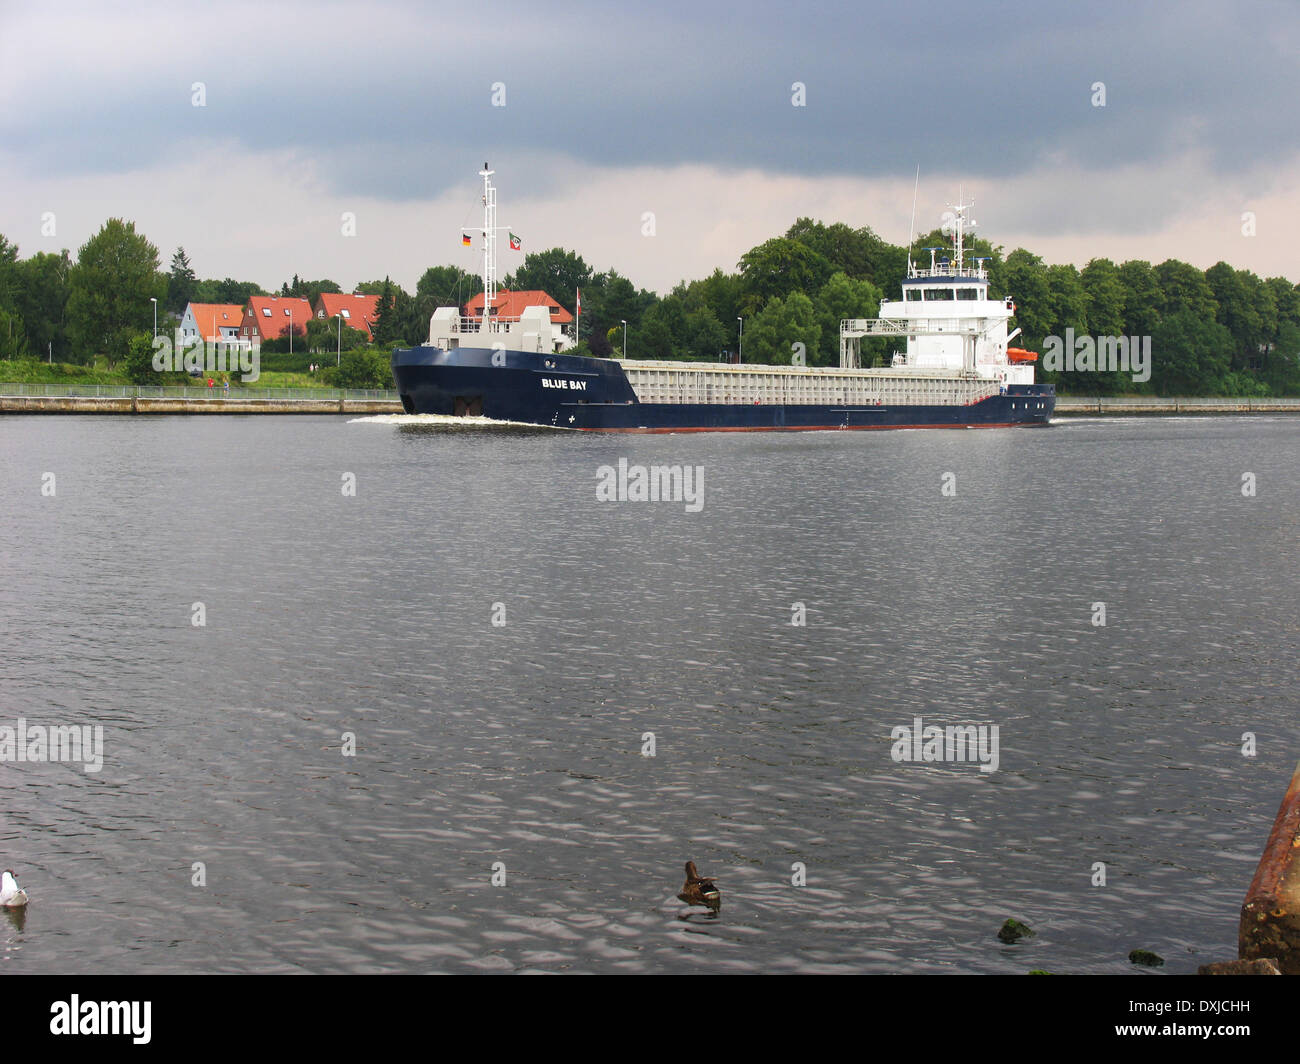 The Kiel Canal. The Kiel Canal connects the North Sea with the Baltic Sea (Kiel Fjord). This waterway is the most frequented artificial waterway in the world based on the number of ships. Photo: Klaus Nowottnick Date: July 22, 2007 Stock Photo